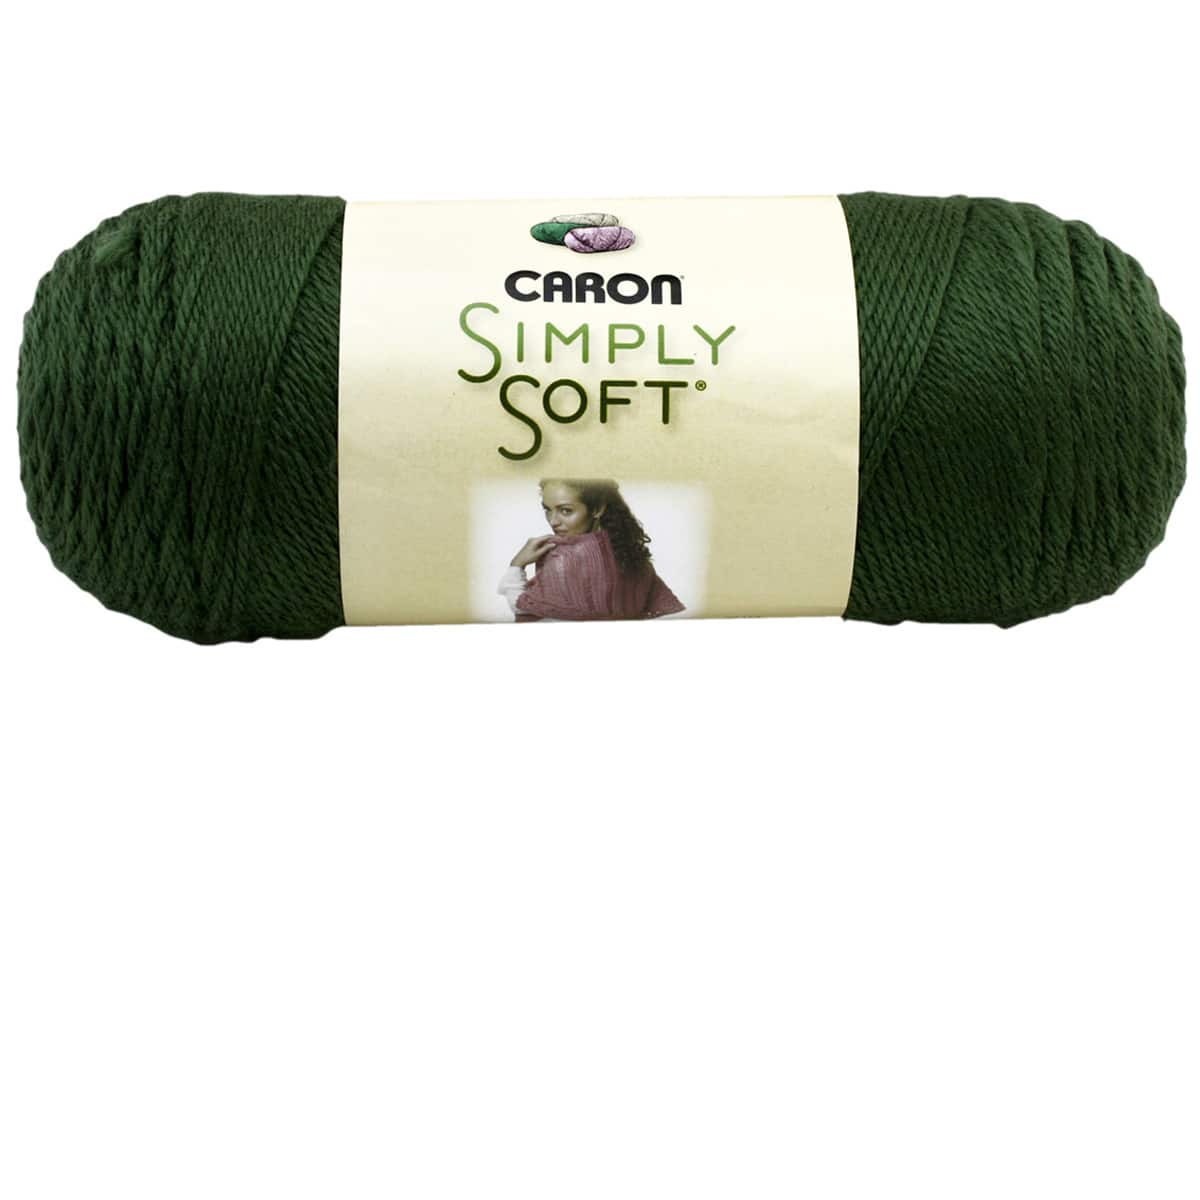 Caron Simply Soft Collection-Bag of 3 Yarn Pack